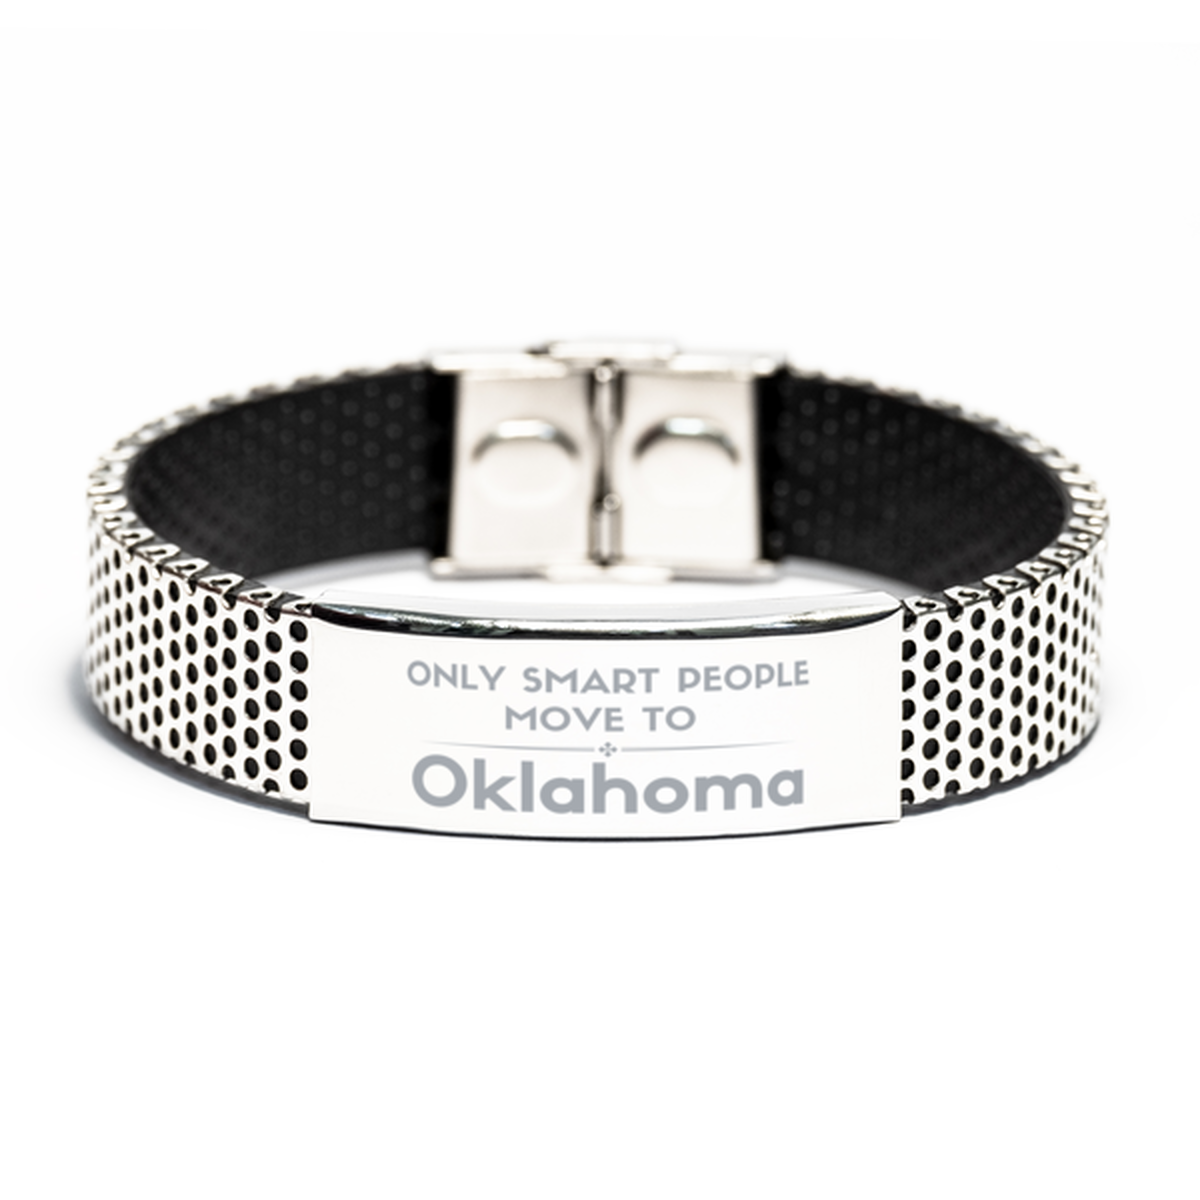 Only smart people move to Oklahoma Stainless Steel Bracelet, Gag Gifts For Oklahoma, Move to Oklahoma Gifts for Friends Coworker Funny Saying Quote